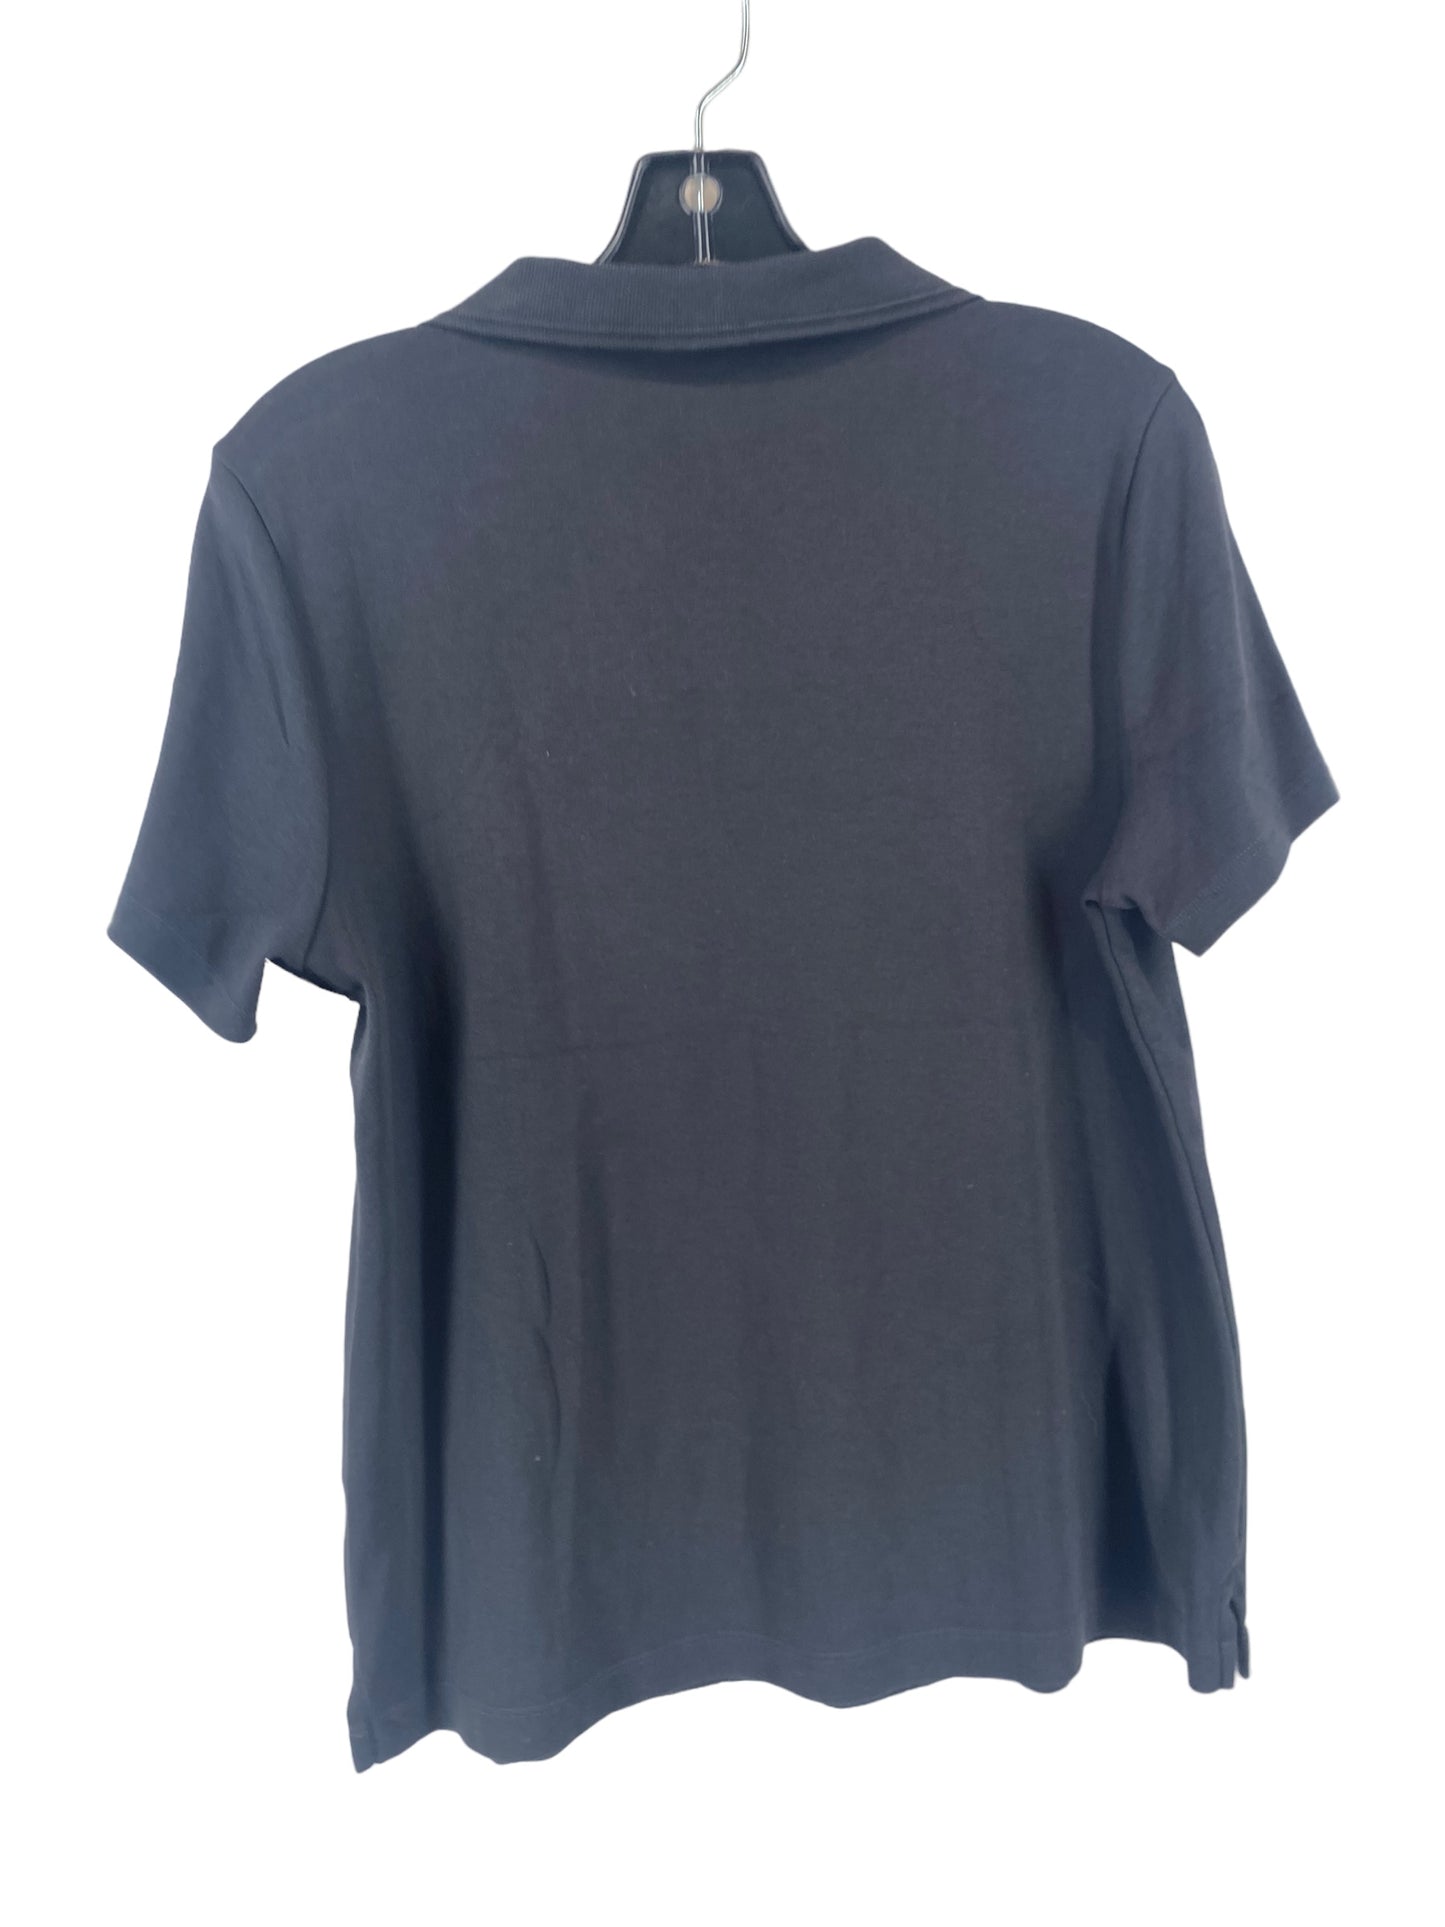 Top Short Sleeve By Lands End  Size: M